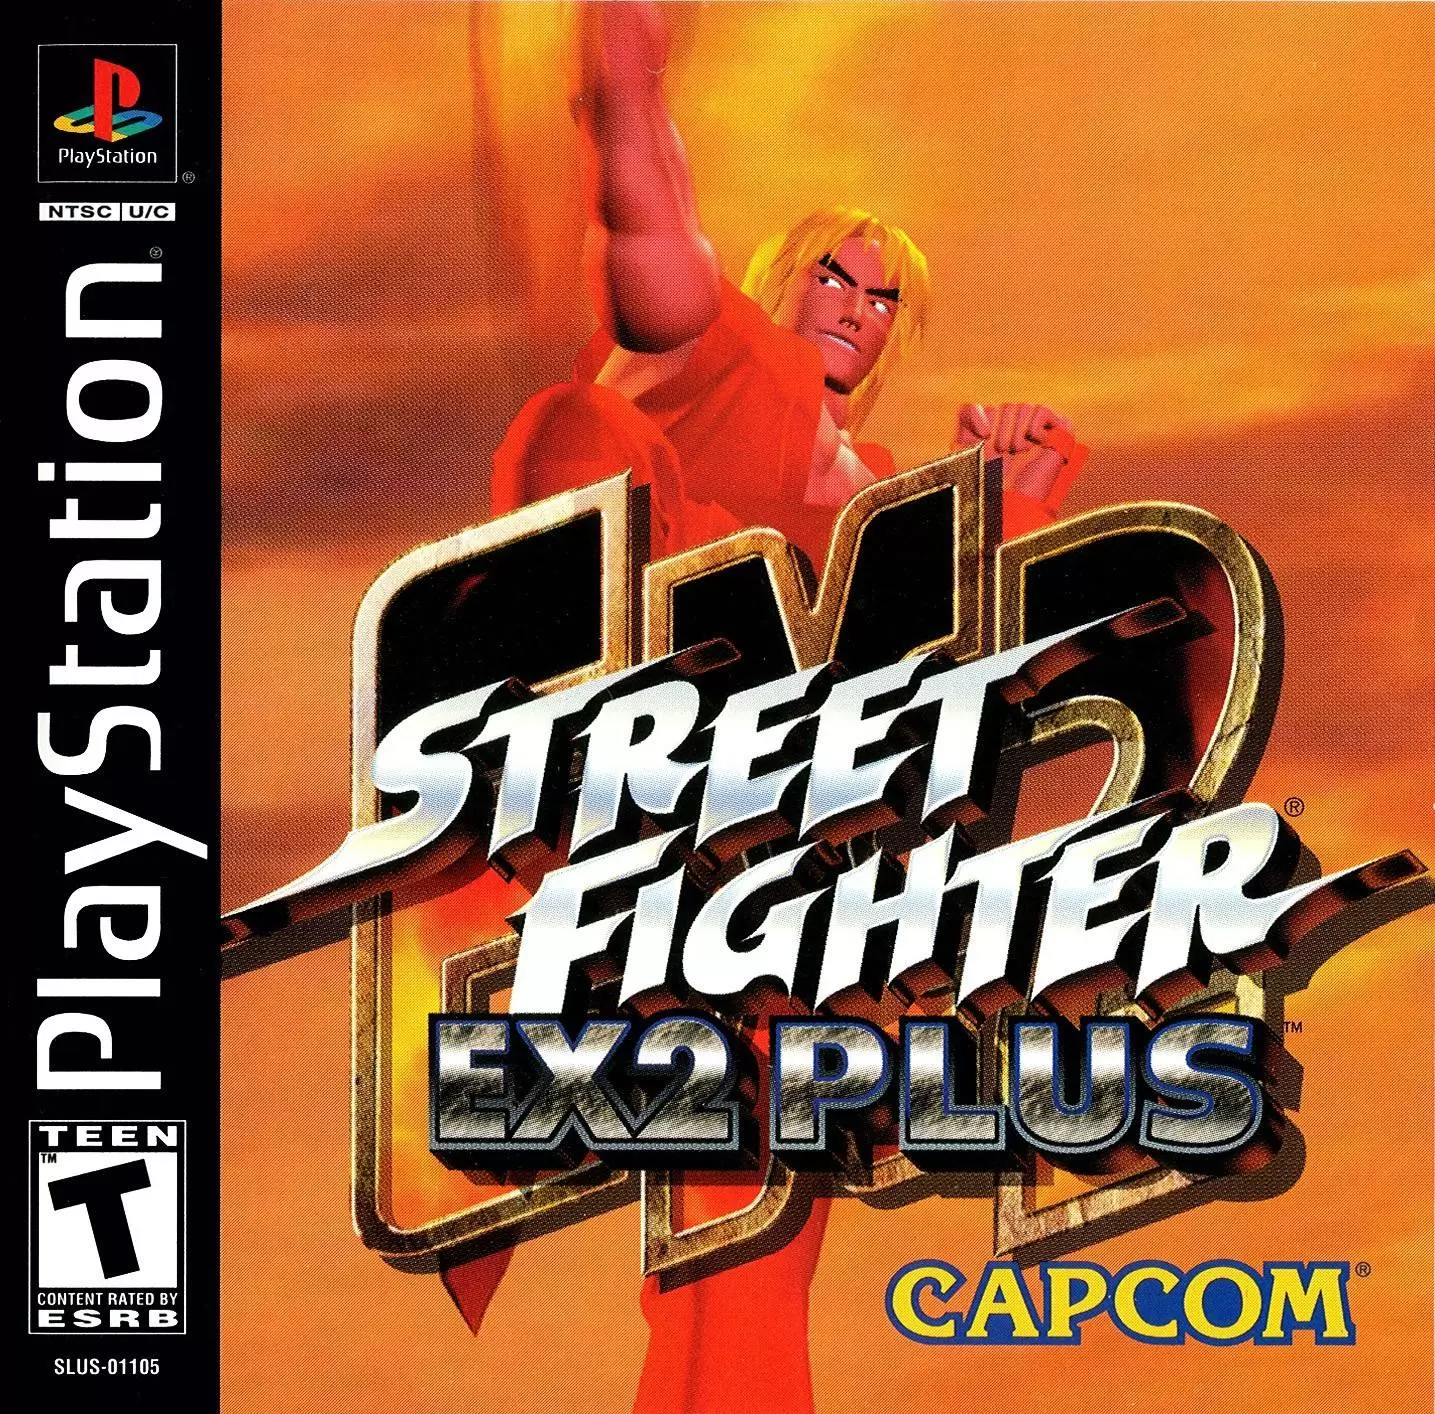 Playstation games - Street Fighter EX 2 Plus